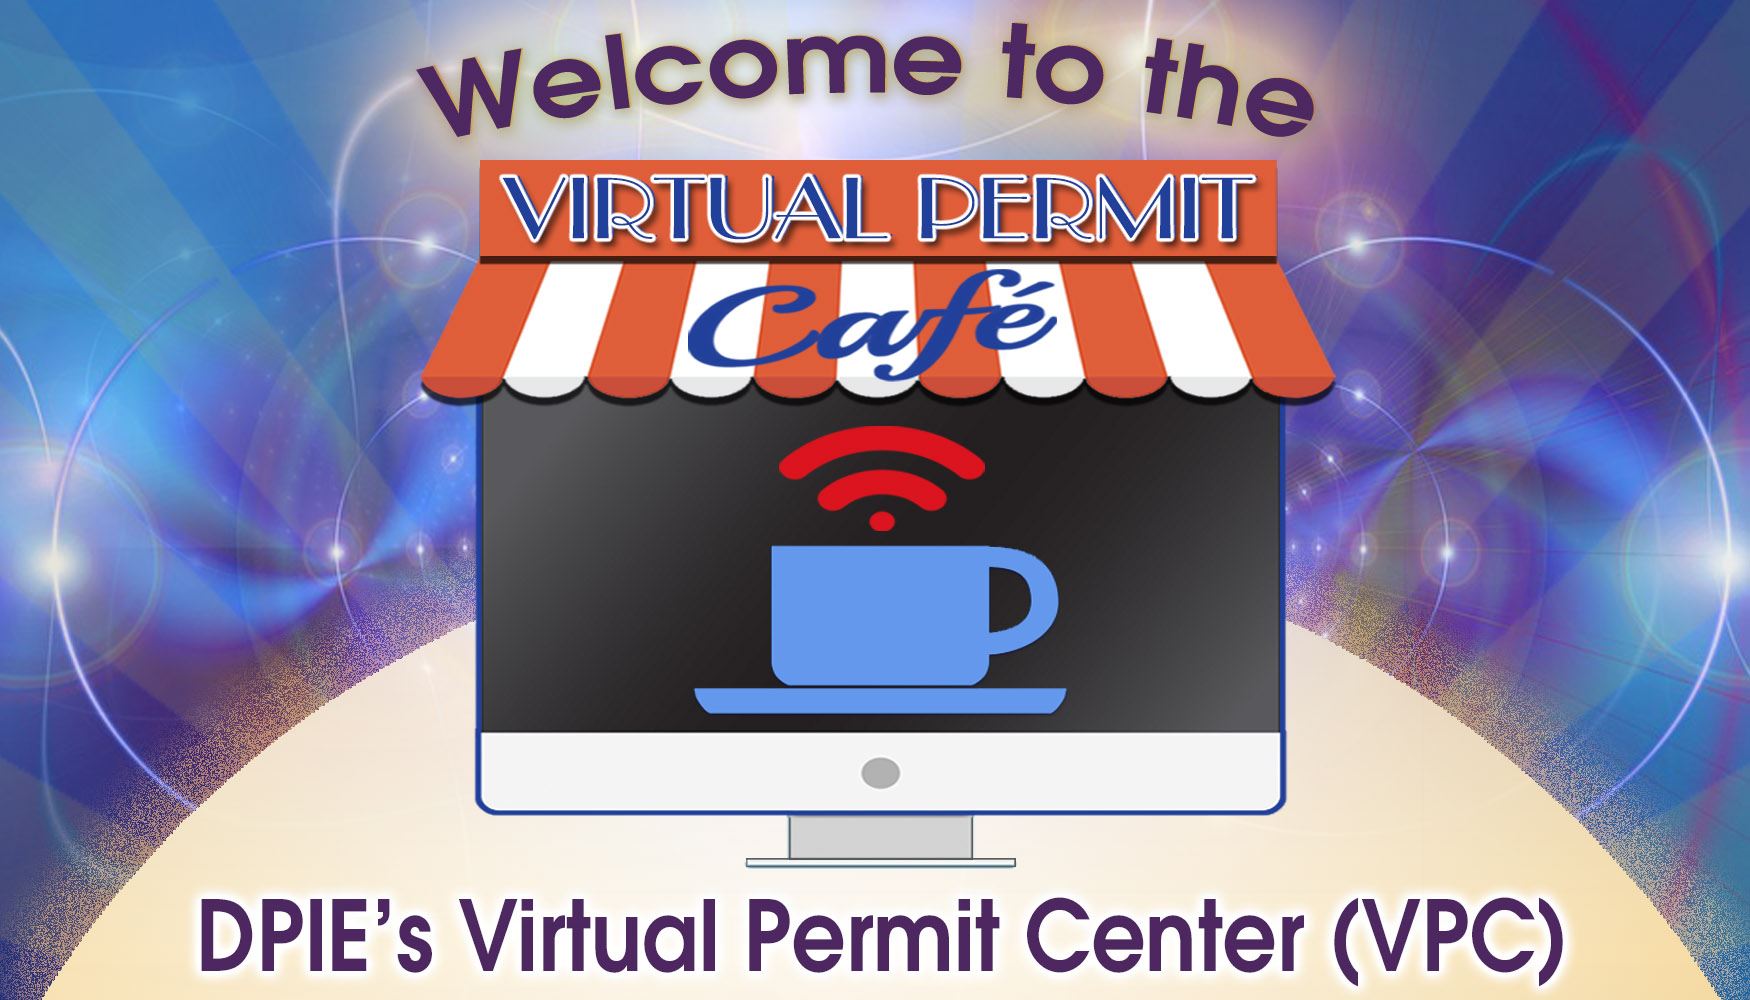 Welcome to the DPIE Virtual Permit Cafe, for Homeowner Walk-Through Permits 2B